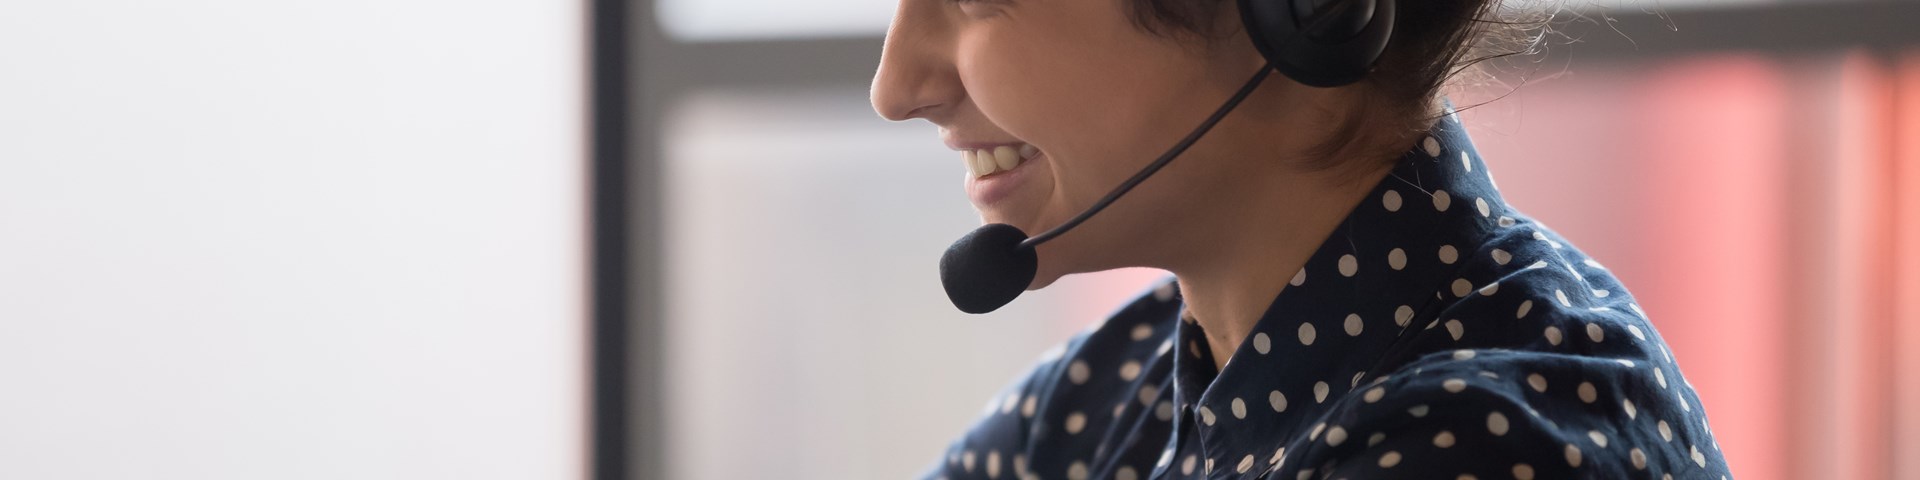 Smiling woman answering sale calls